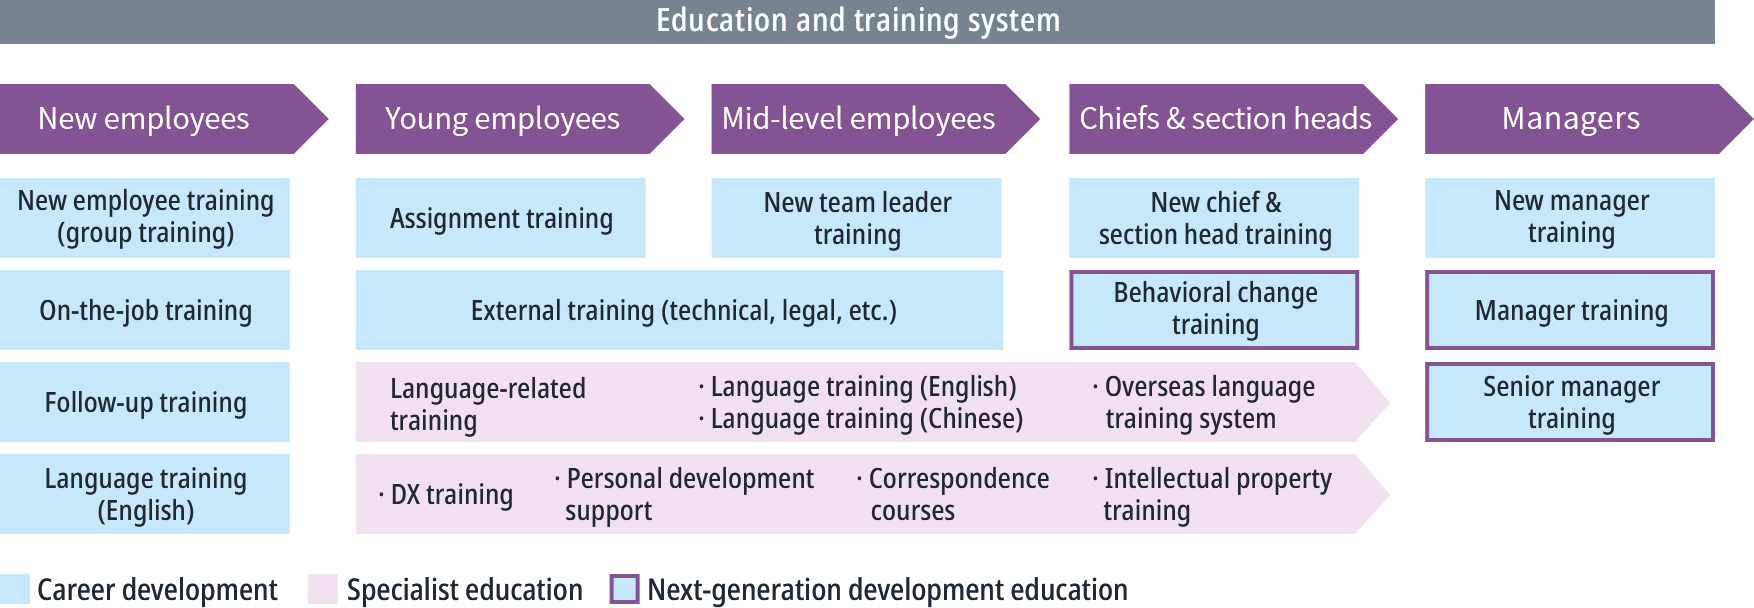 Chart of Education and training system